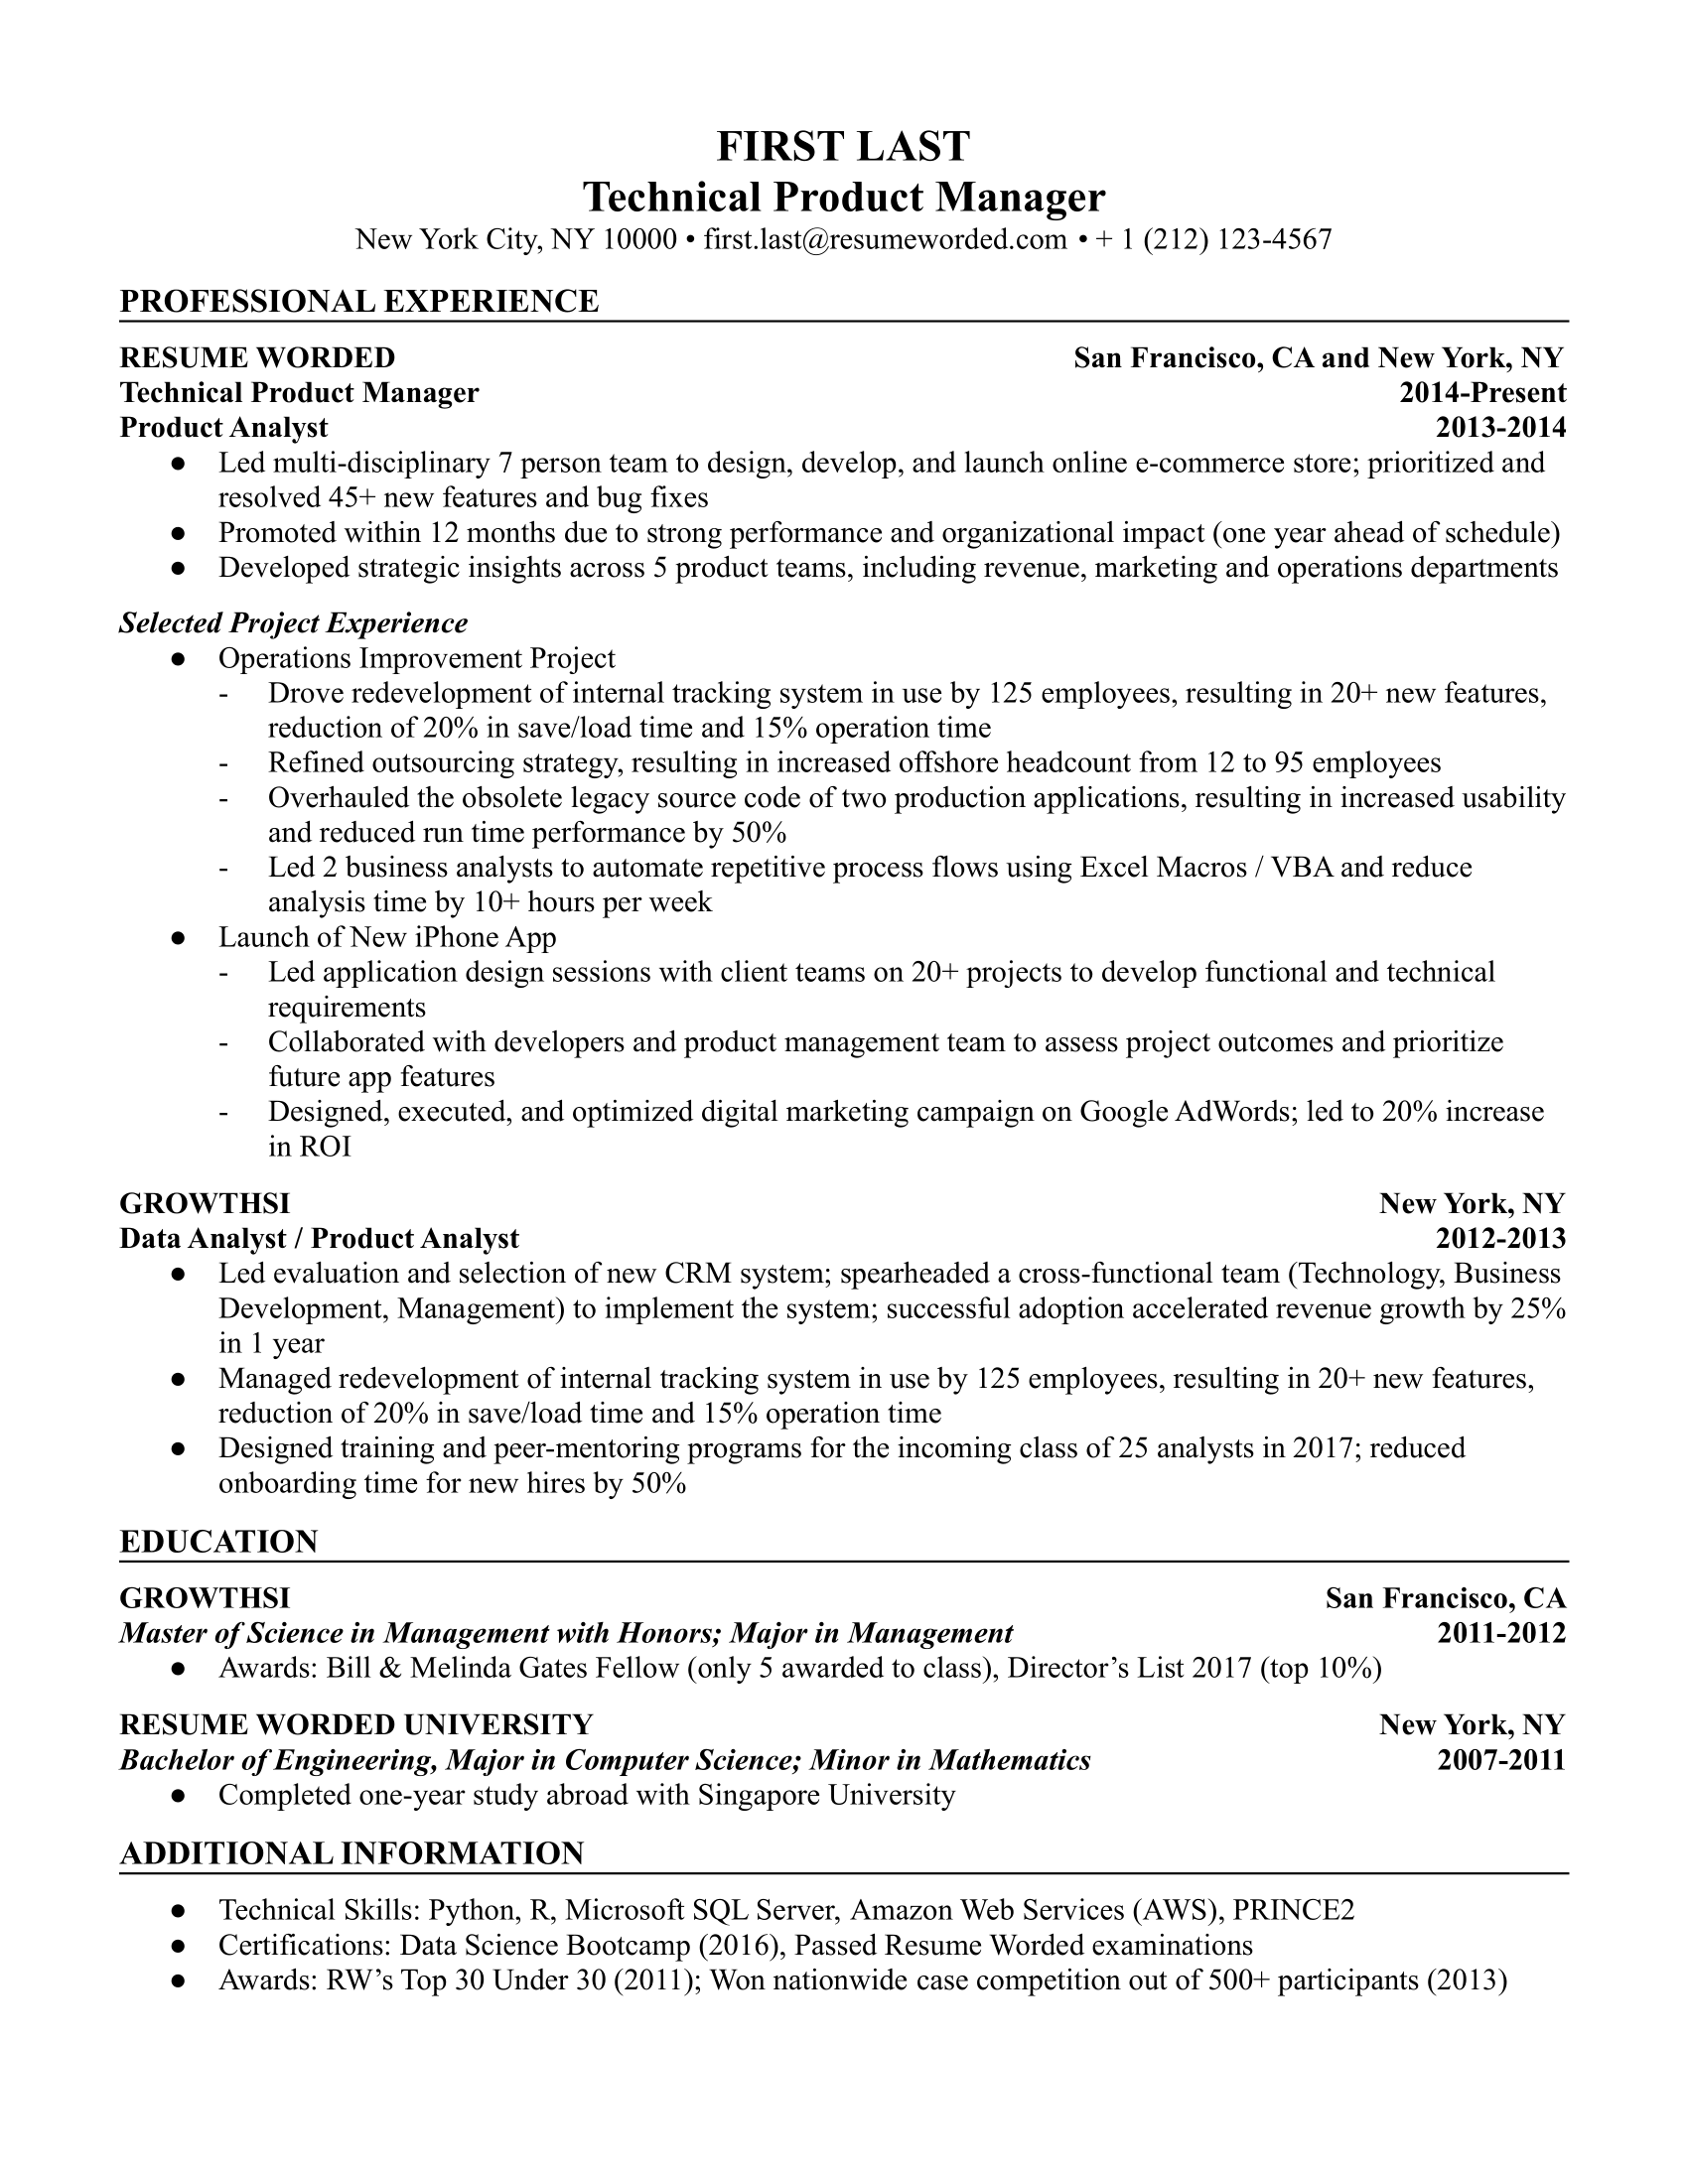 Technical Product Manager resume showcasing expertise and achievements.